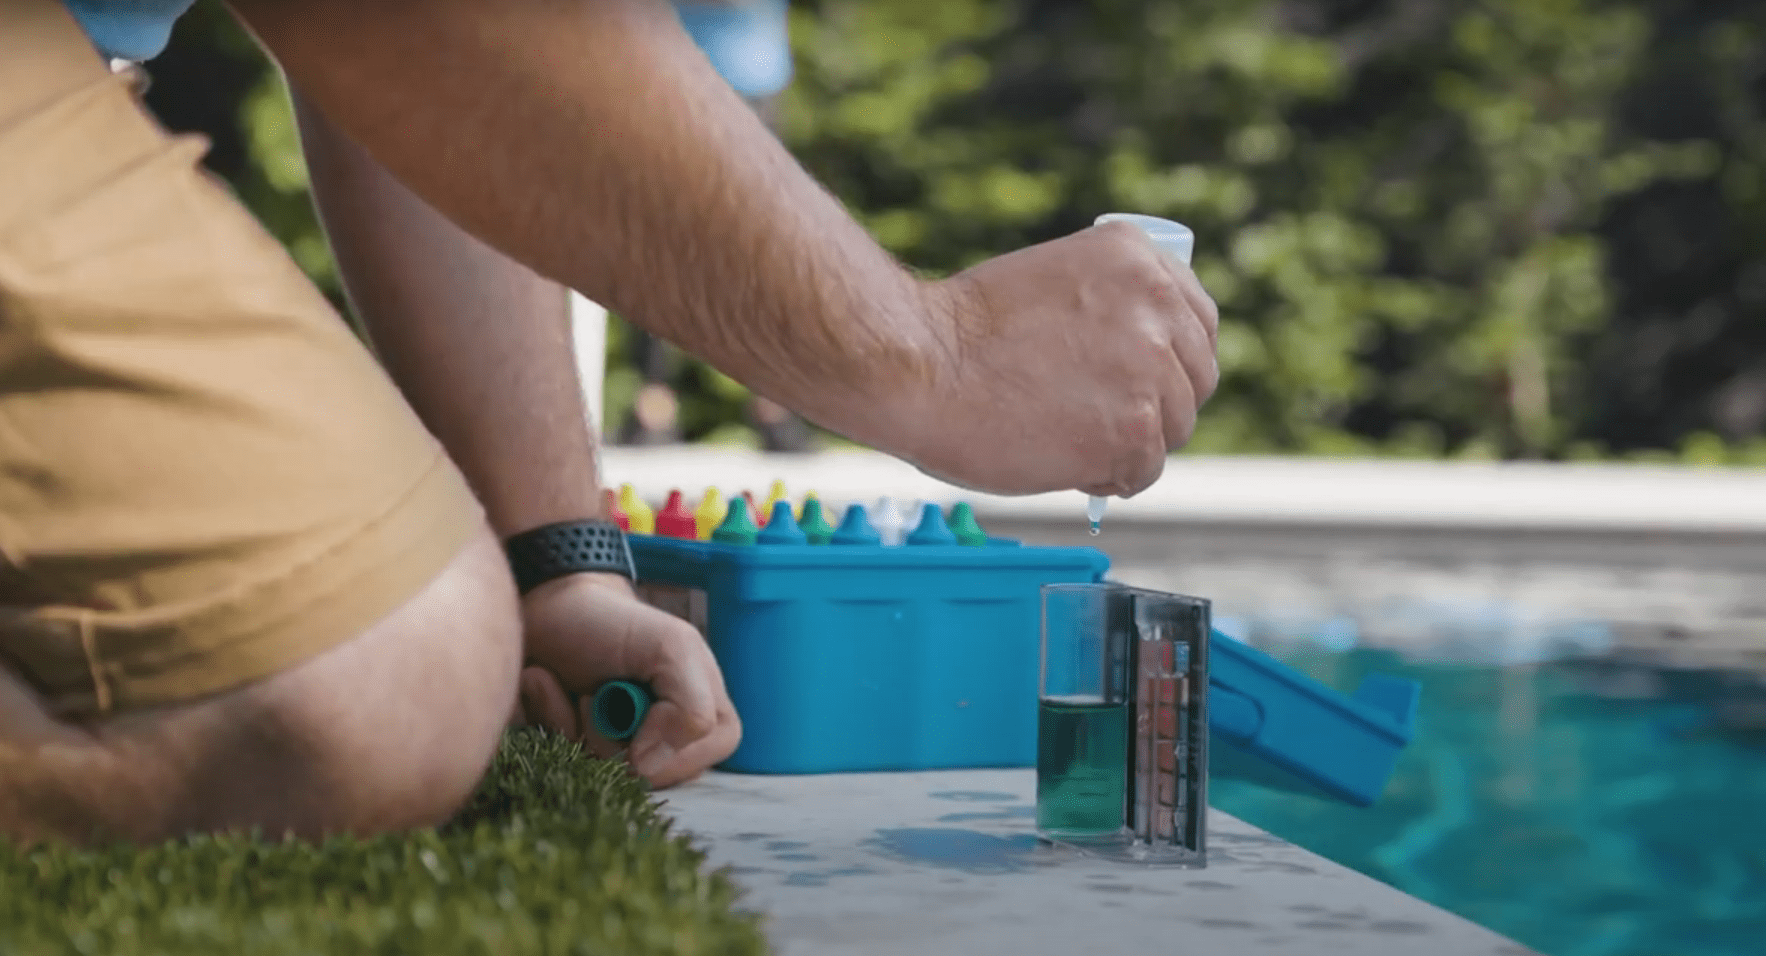 A person is testing pool water quality using a kit, dripping liquid into a measuring vial, kneeling by a swimming pool on a sunny day.